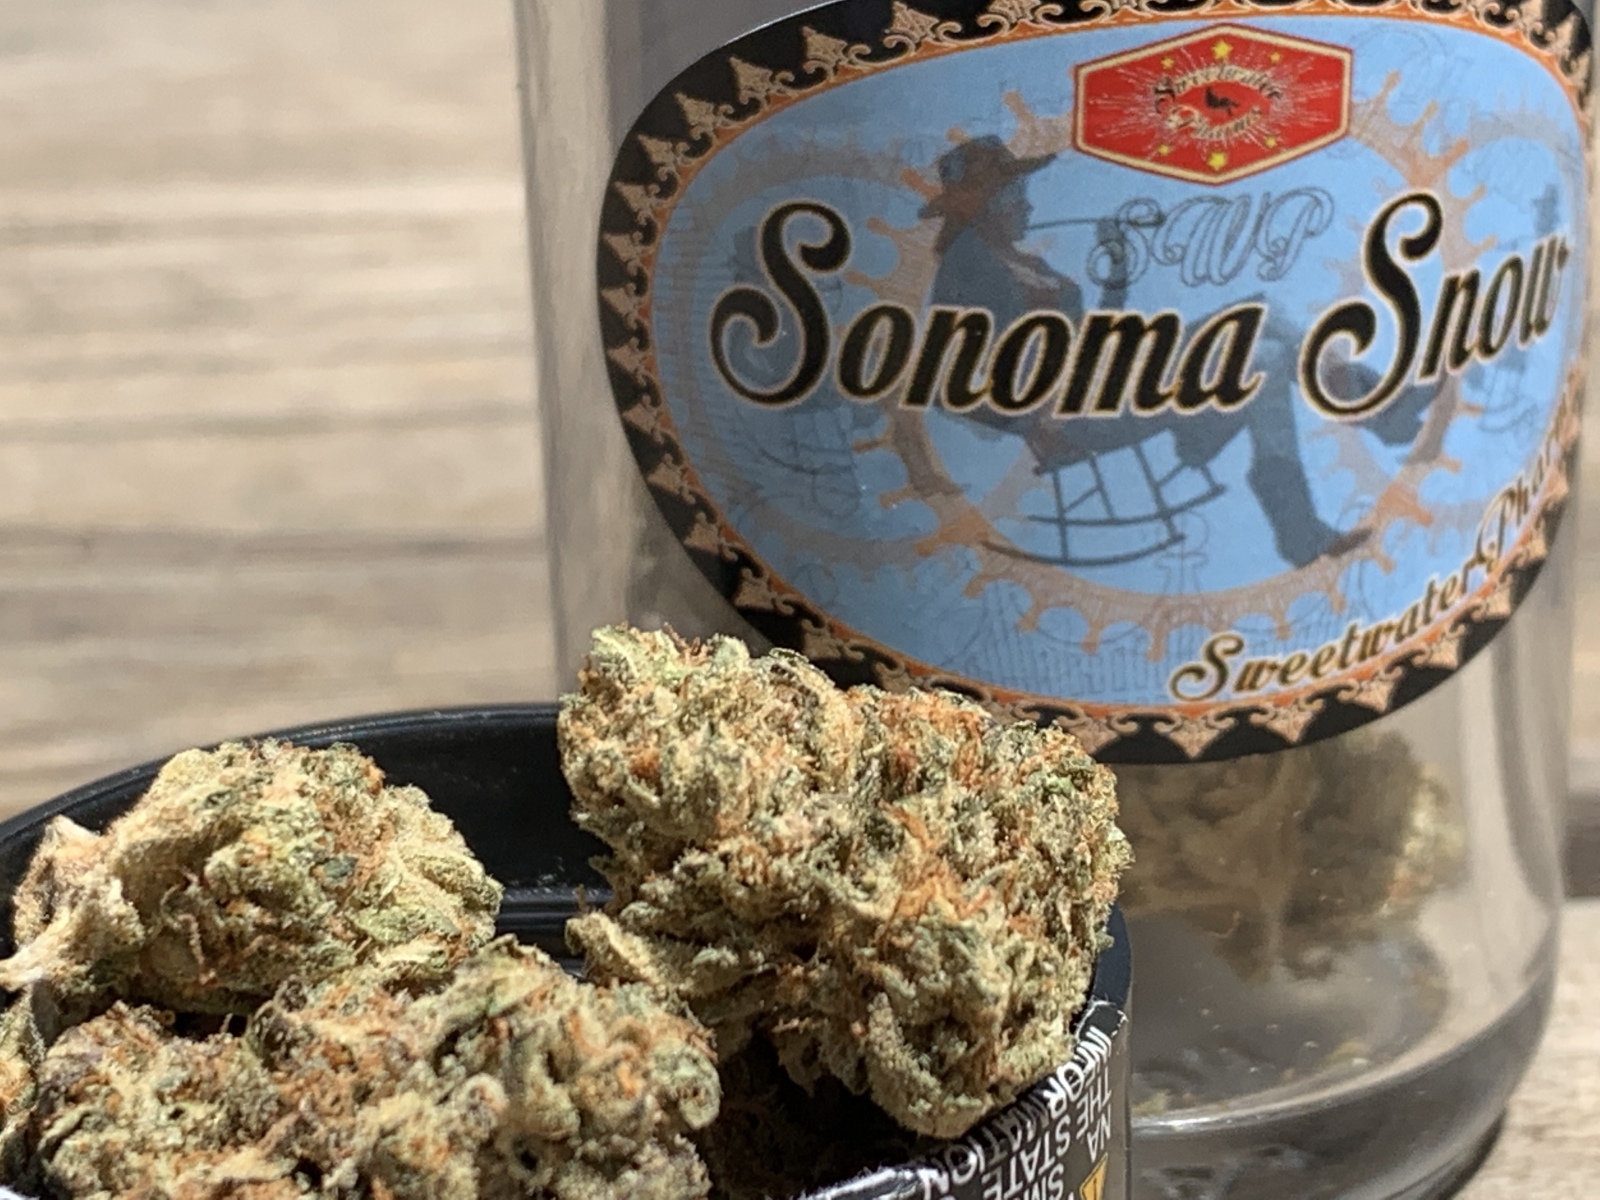 Sweetwater Pharms Sonoma Snow prepackaged eighth